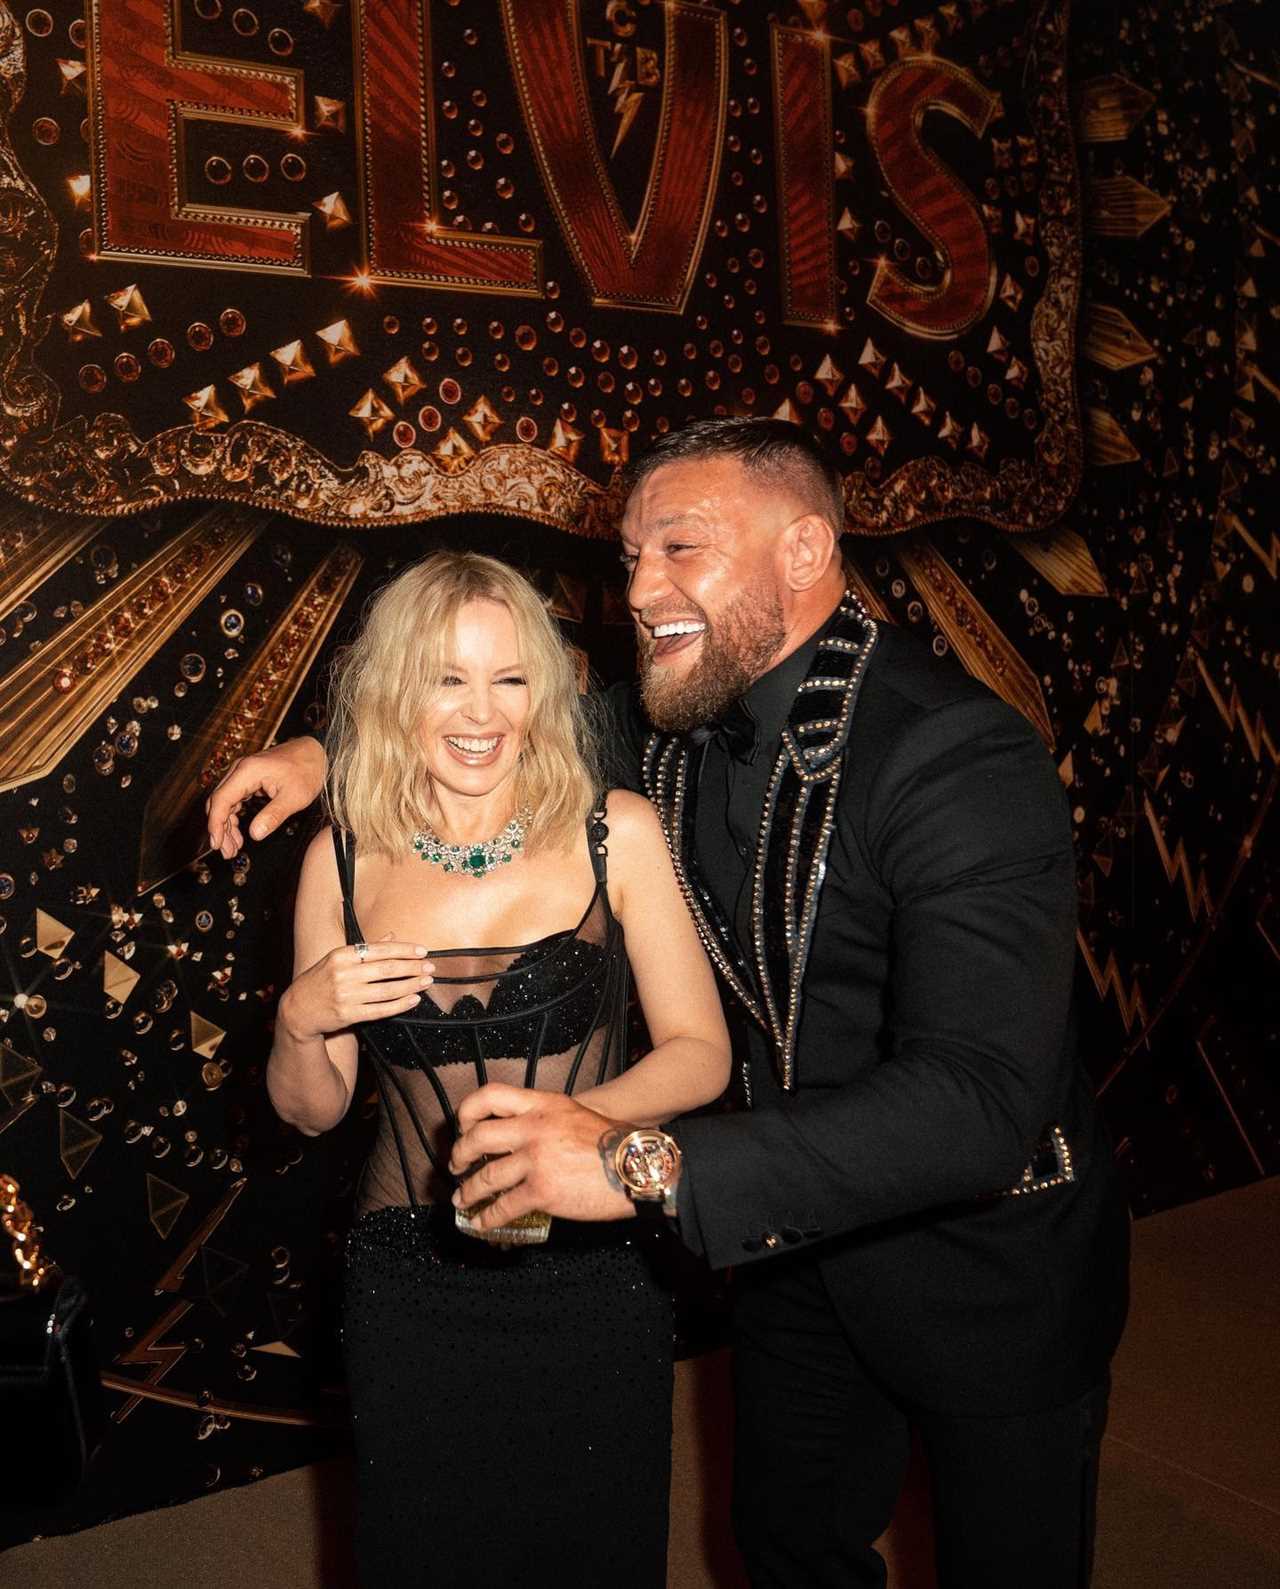 Conor McGregor asked Kylie Minogue to take a picture of him and UFC star, UFC legend, after they partied at the Cannes Film Festival